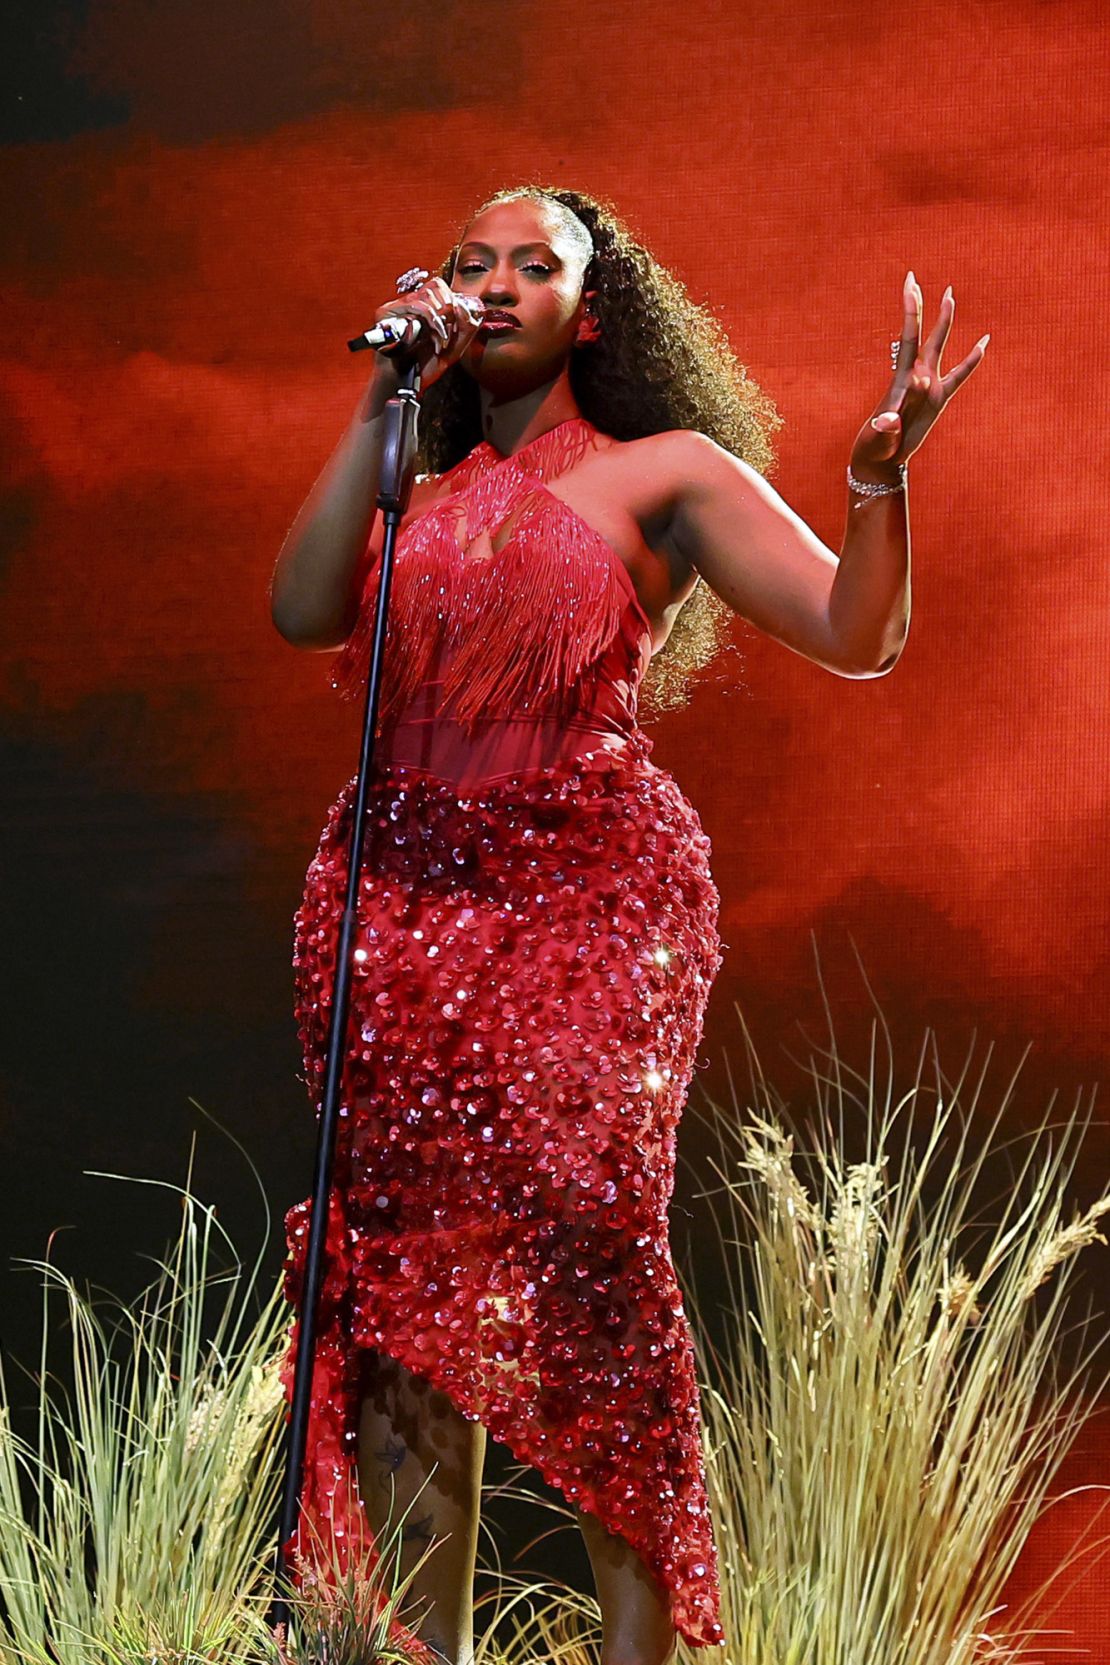 At the Mojave Tent during the second weekend, Tems performed in a embellished ruby-red dress with fringe detailing.